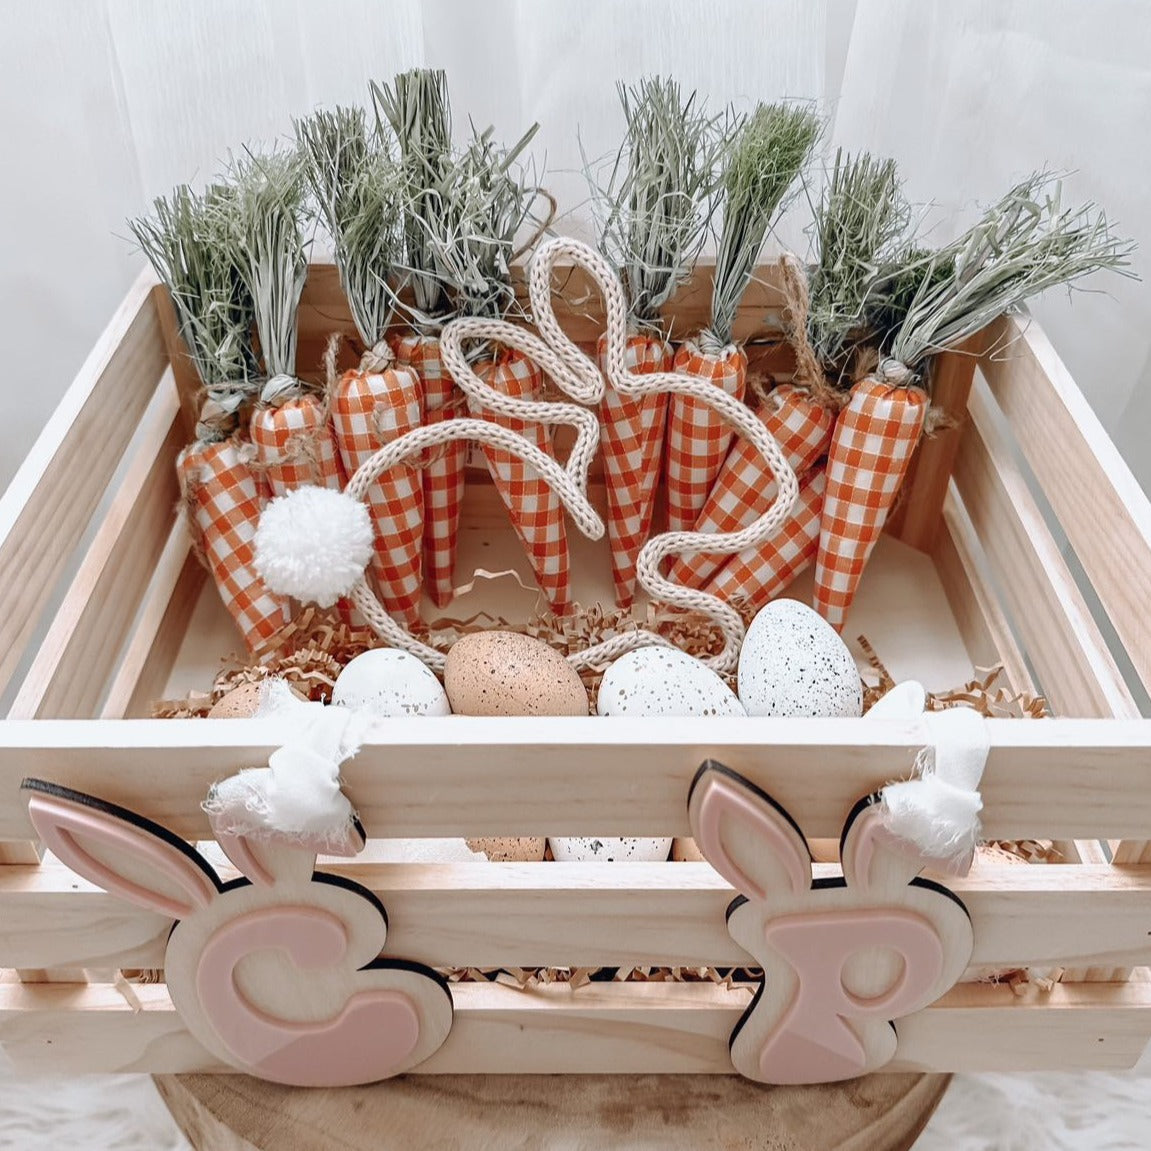 3D Initial Easter Tag & French Knitted Bunny - Collaboration Piece. Attached to Kmart Timber Crate